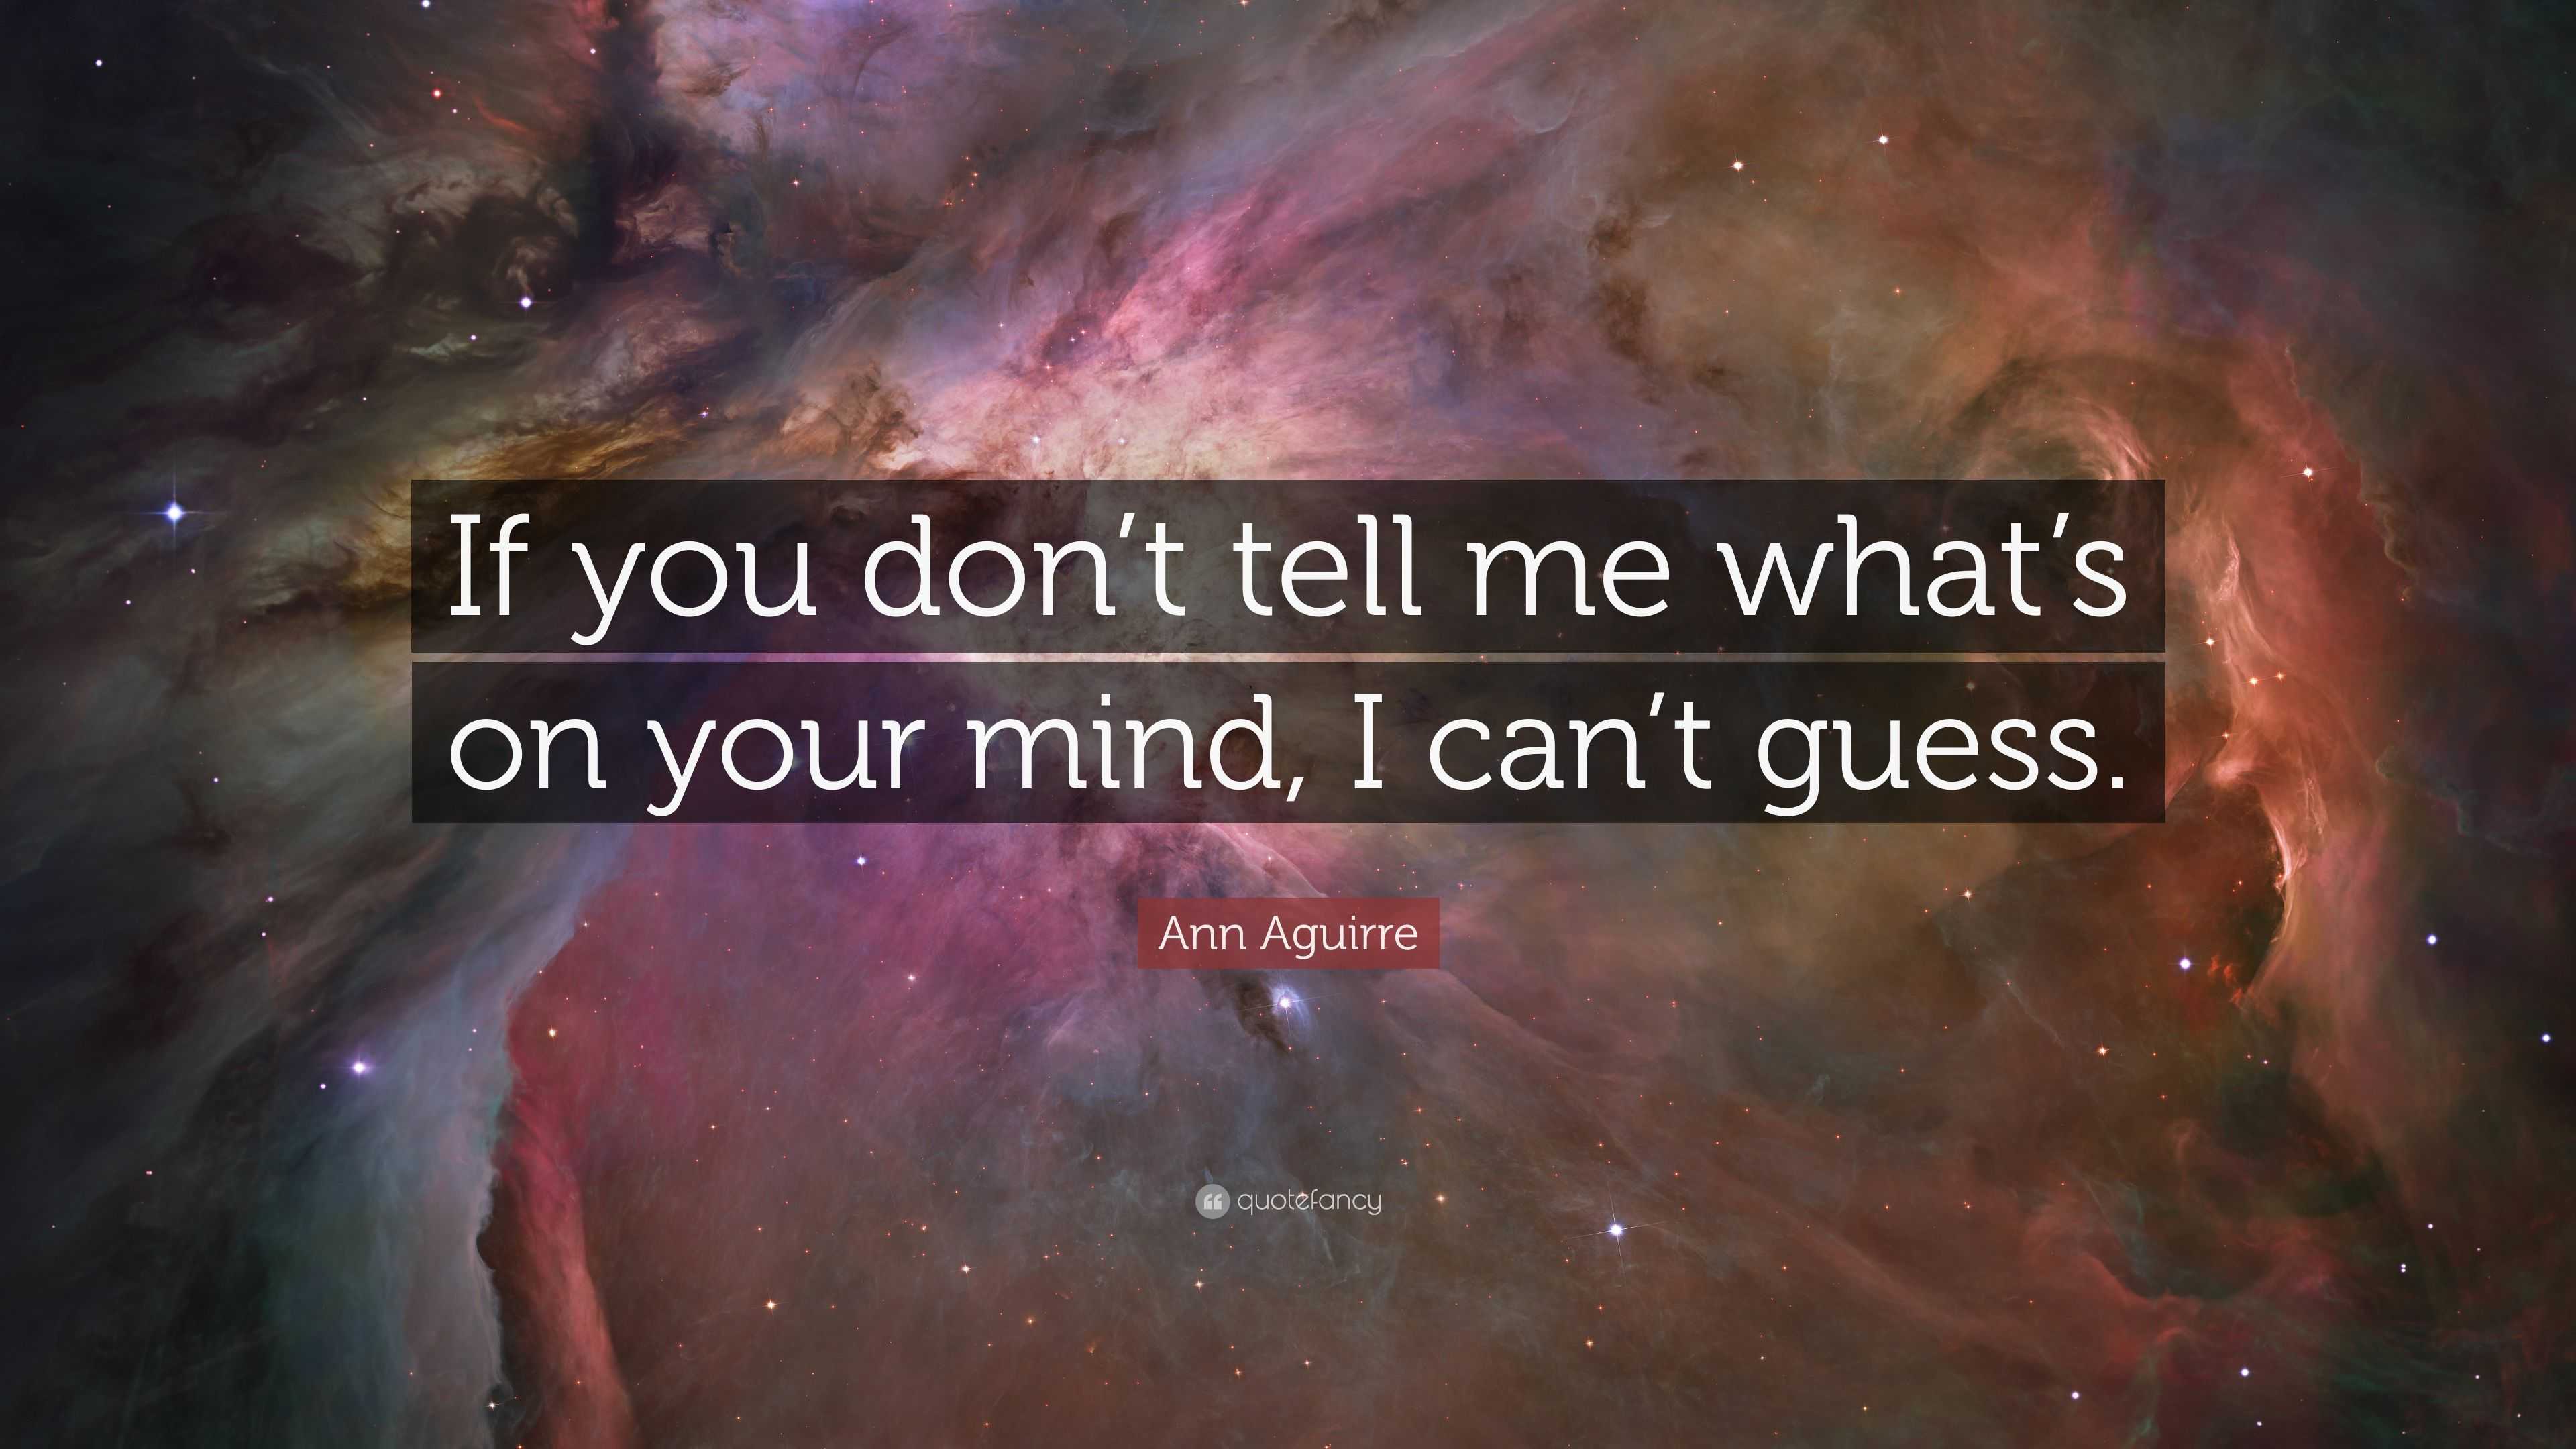 klon Prevail fond Ann Aguirre Quote: “If you don't tell me what's on your mind, I can't